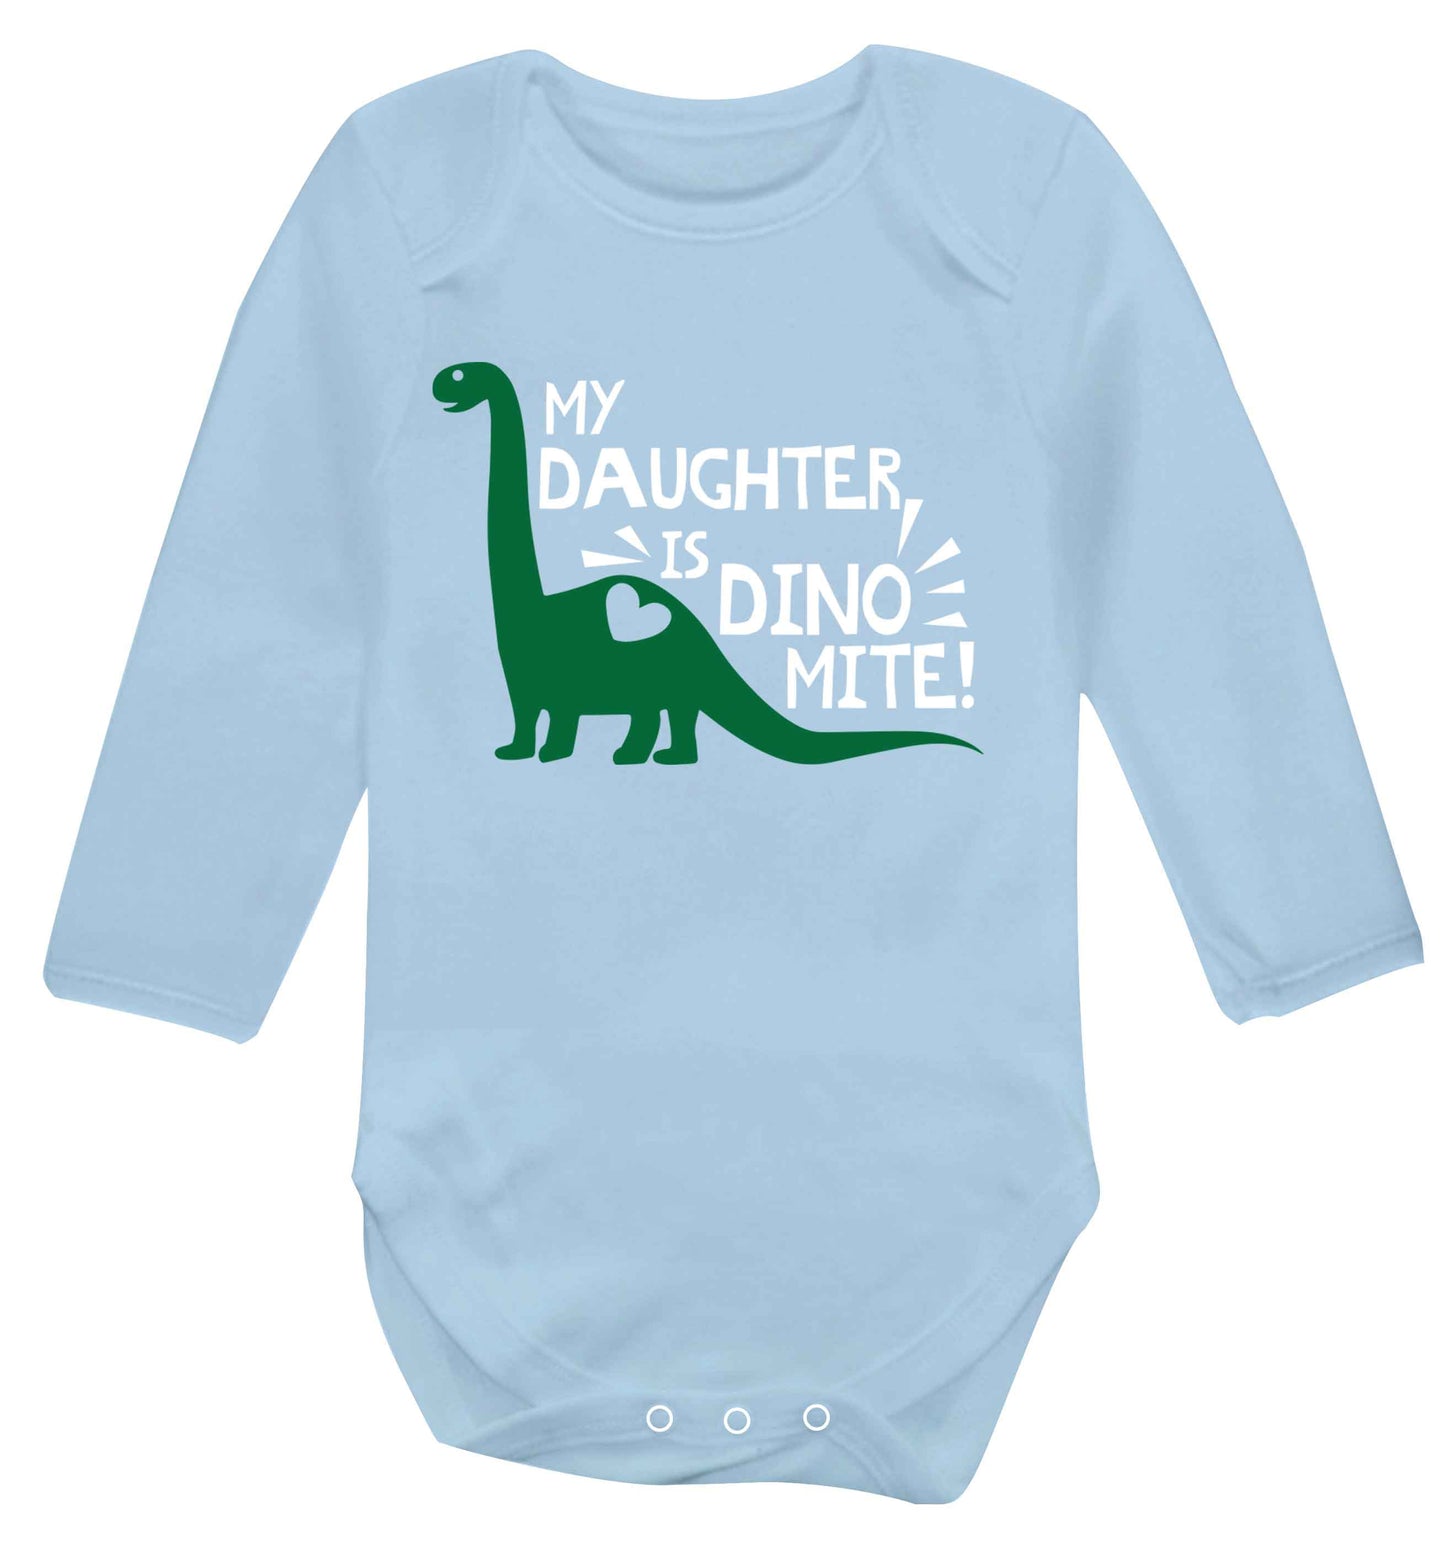 My daughter is dinomite! Baby Vest long sleeved pale blue 6-12 months